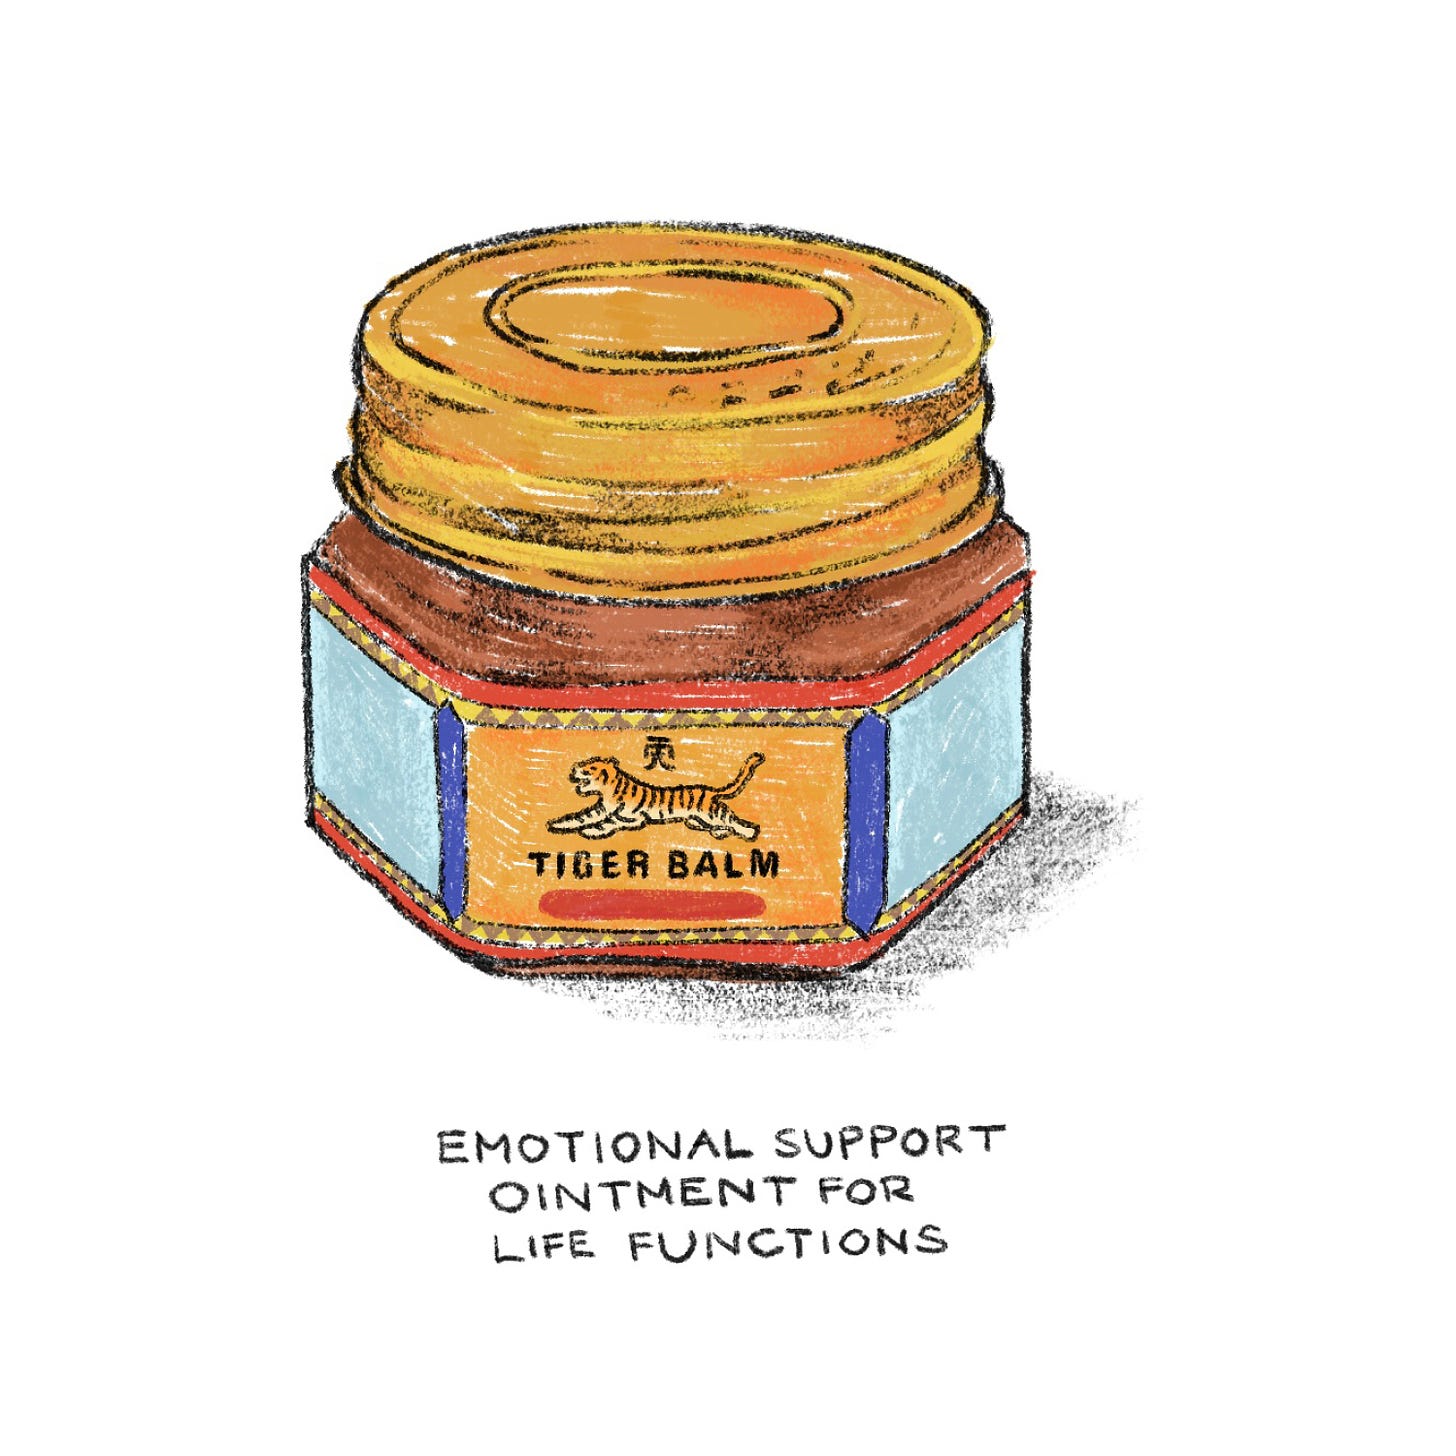 emotional support ointment for life functions, a pencil illustration of tiger balm, a medicinal ointment